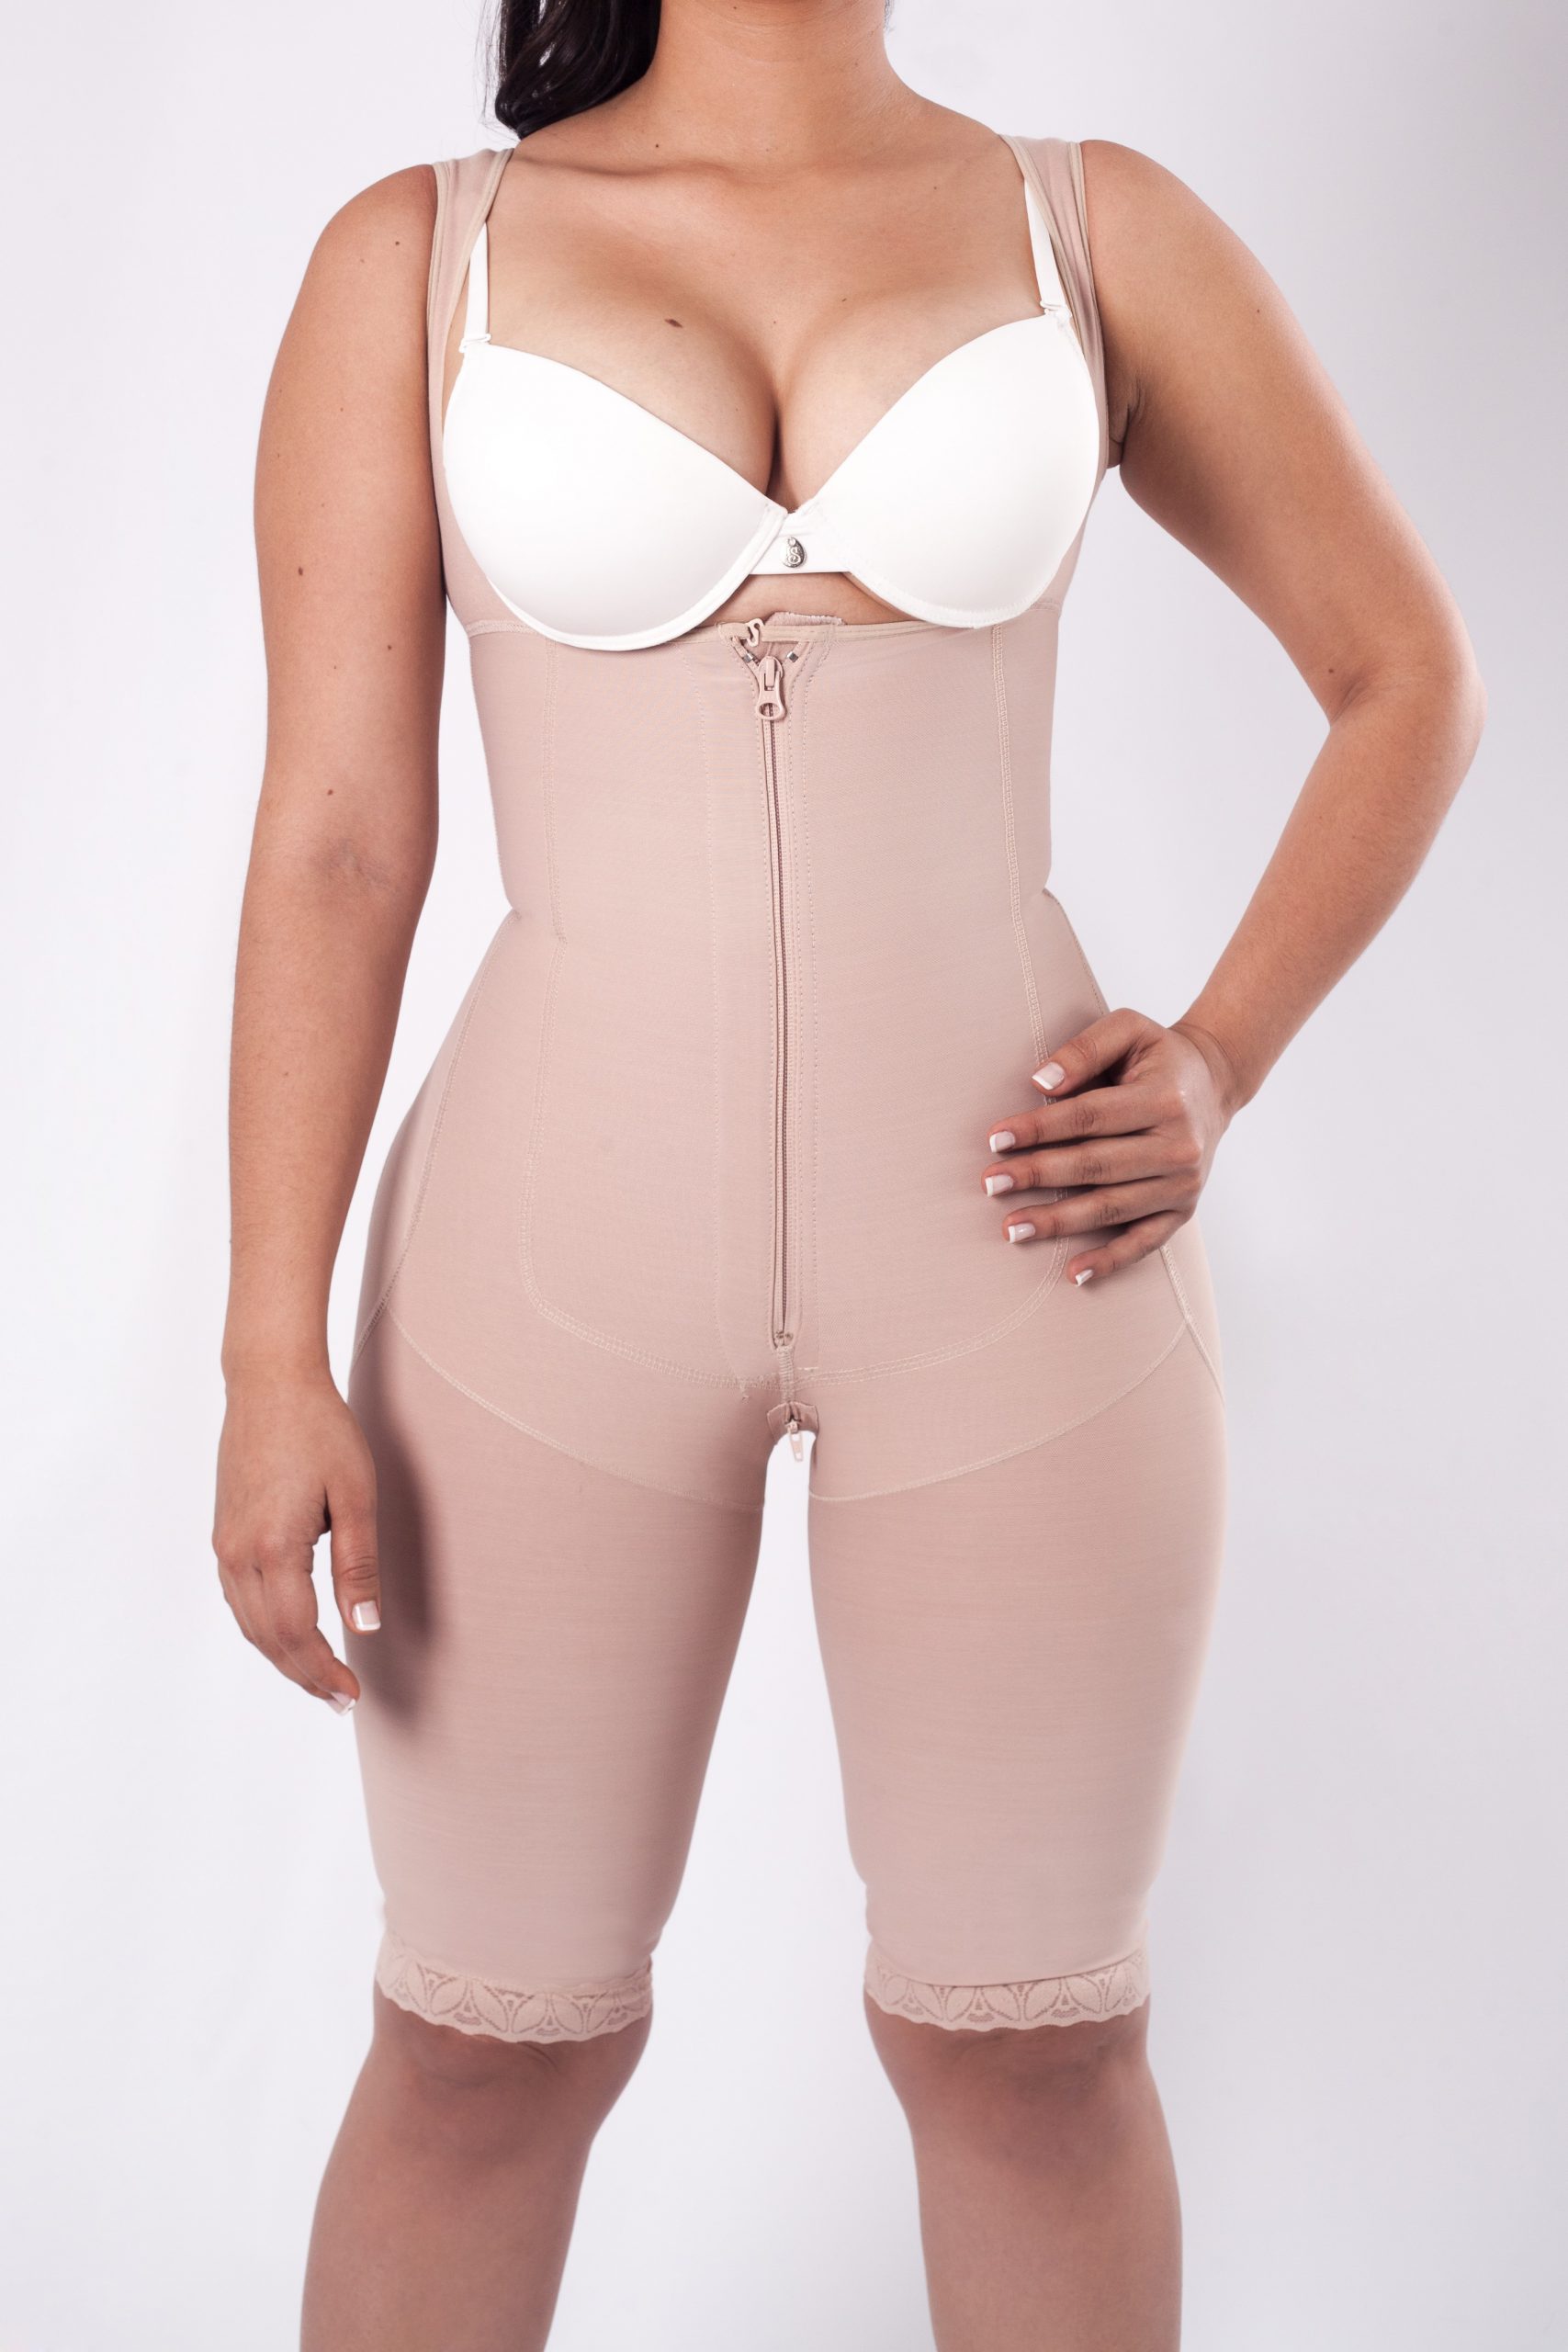 Breast-Covering Sleeveless One-Piece Breasted Shapewear Fajas